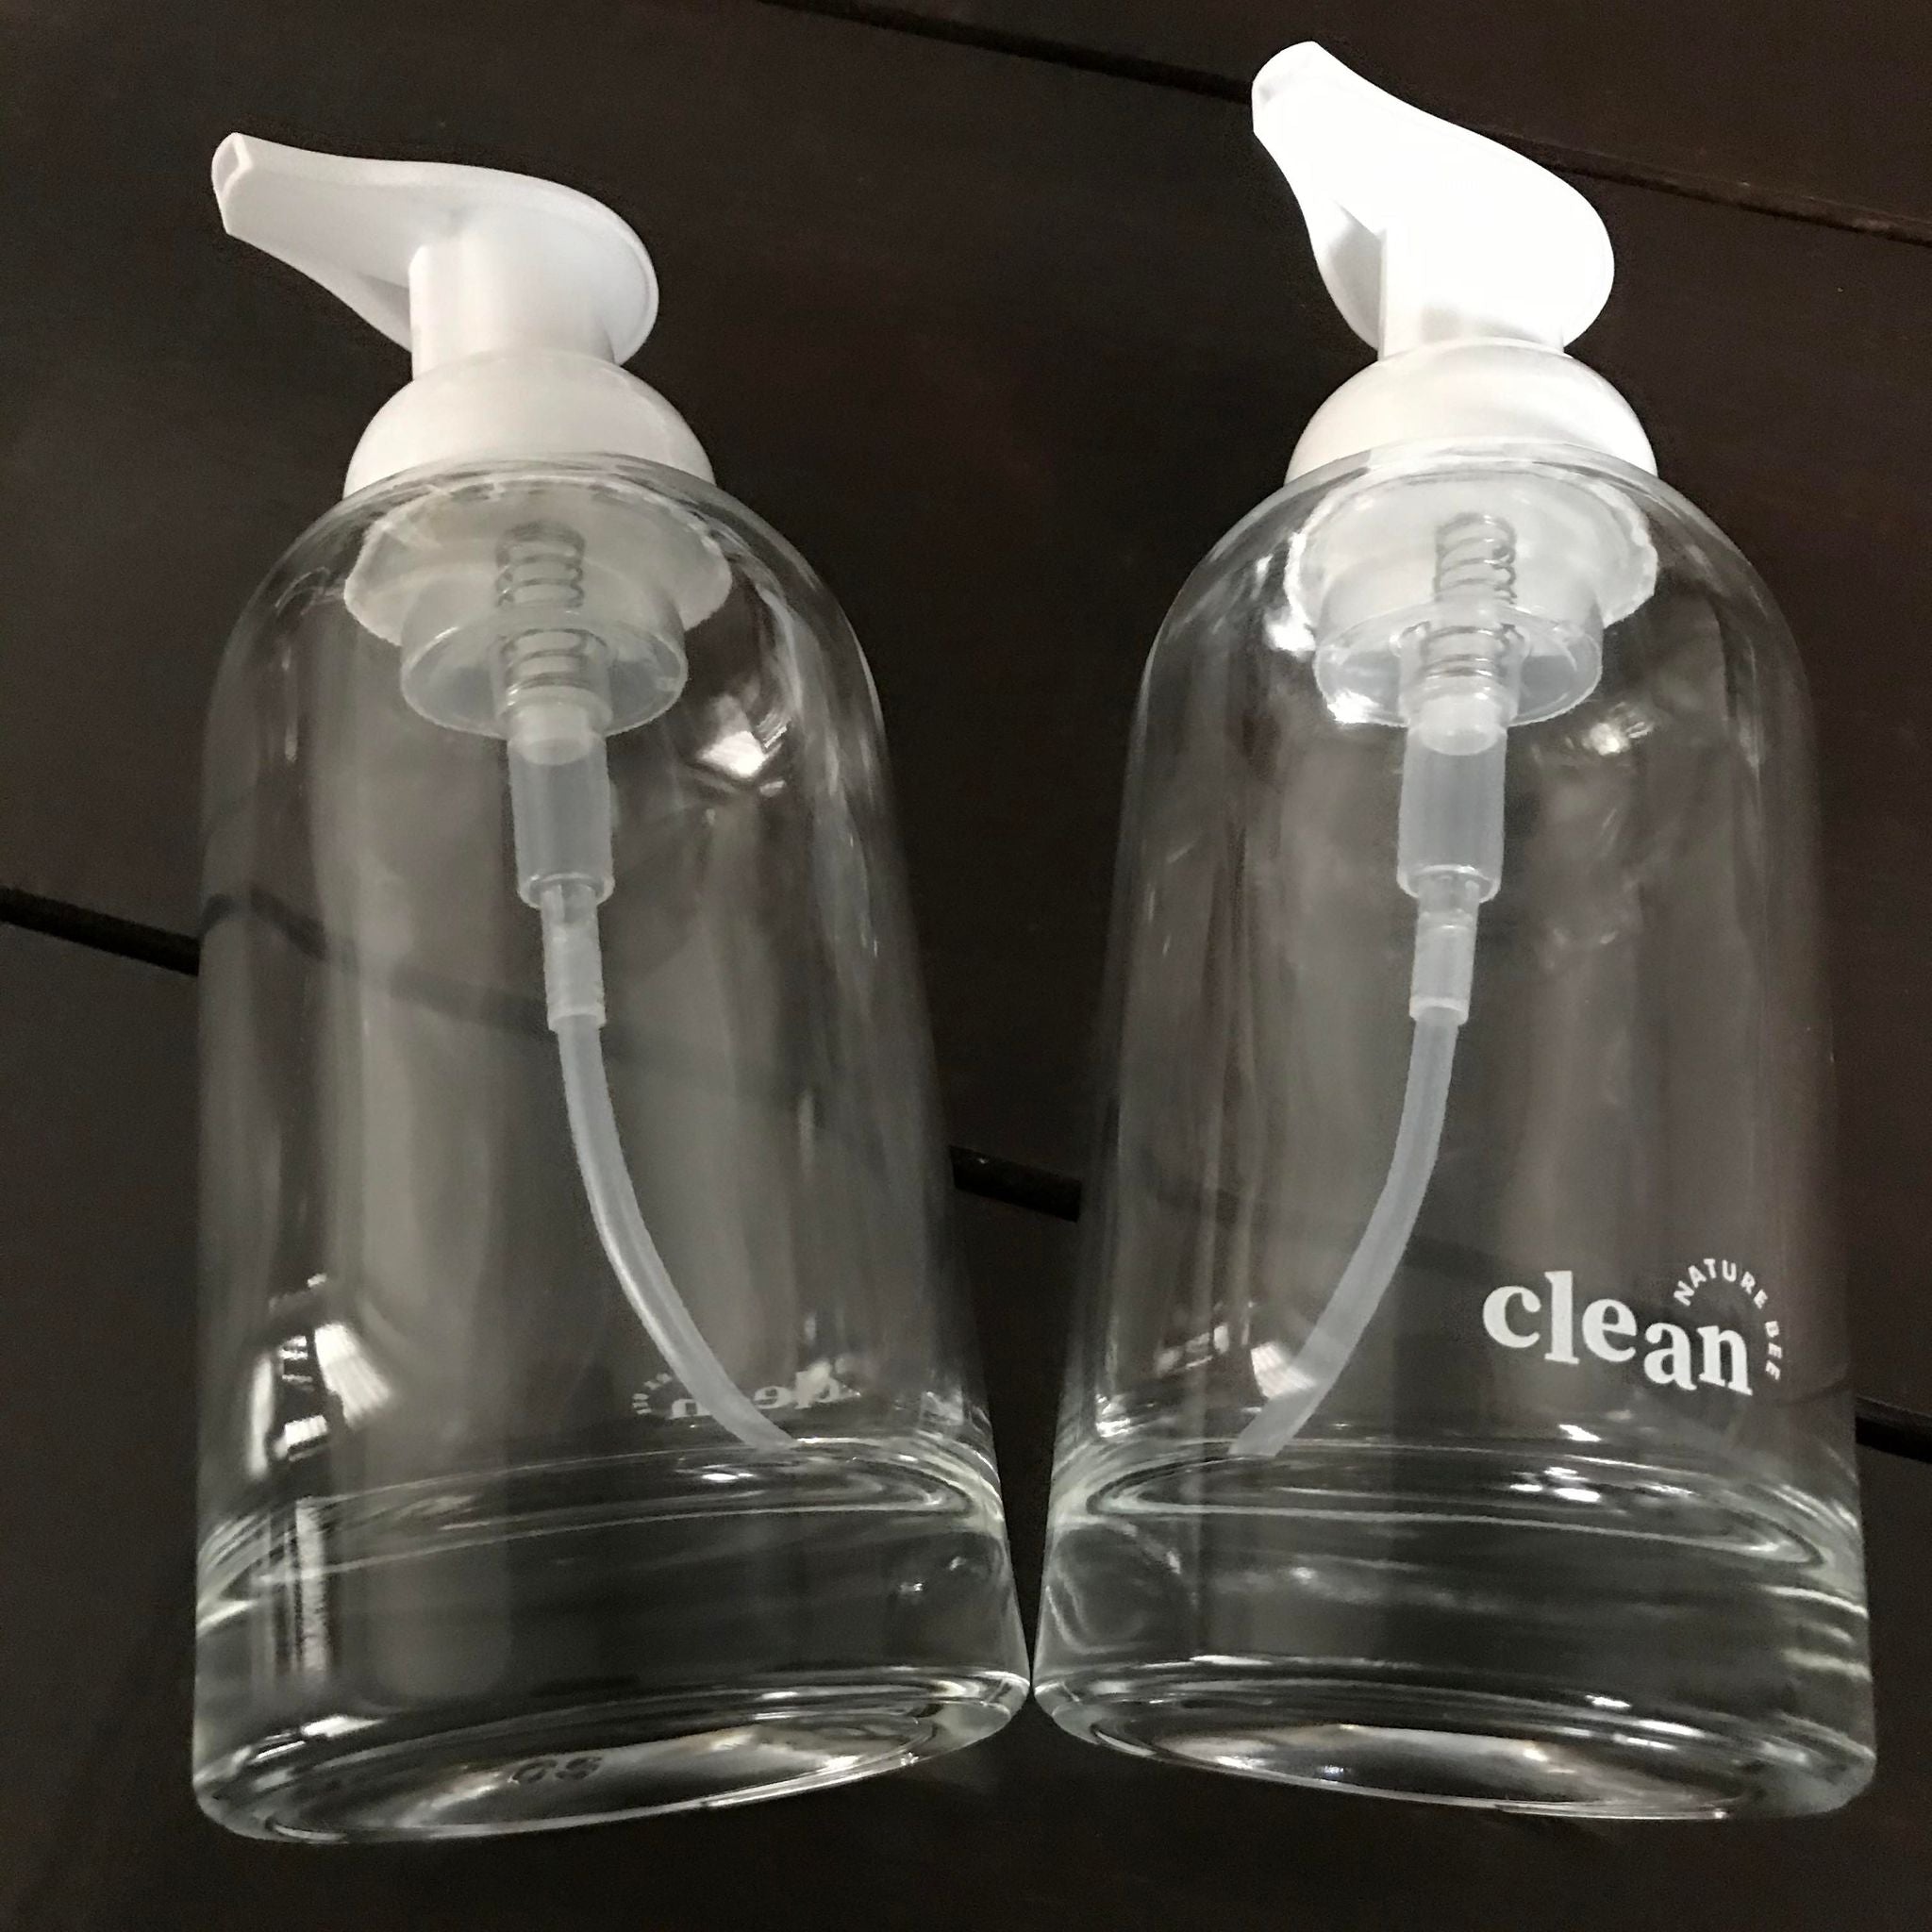 refillable clear glass hand soap foamer bottles with white pump top and white nature bee clean lettering at the bottom front or back of the bottles